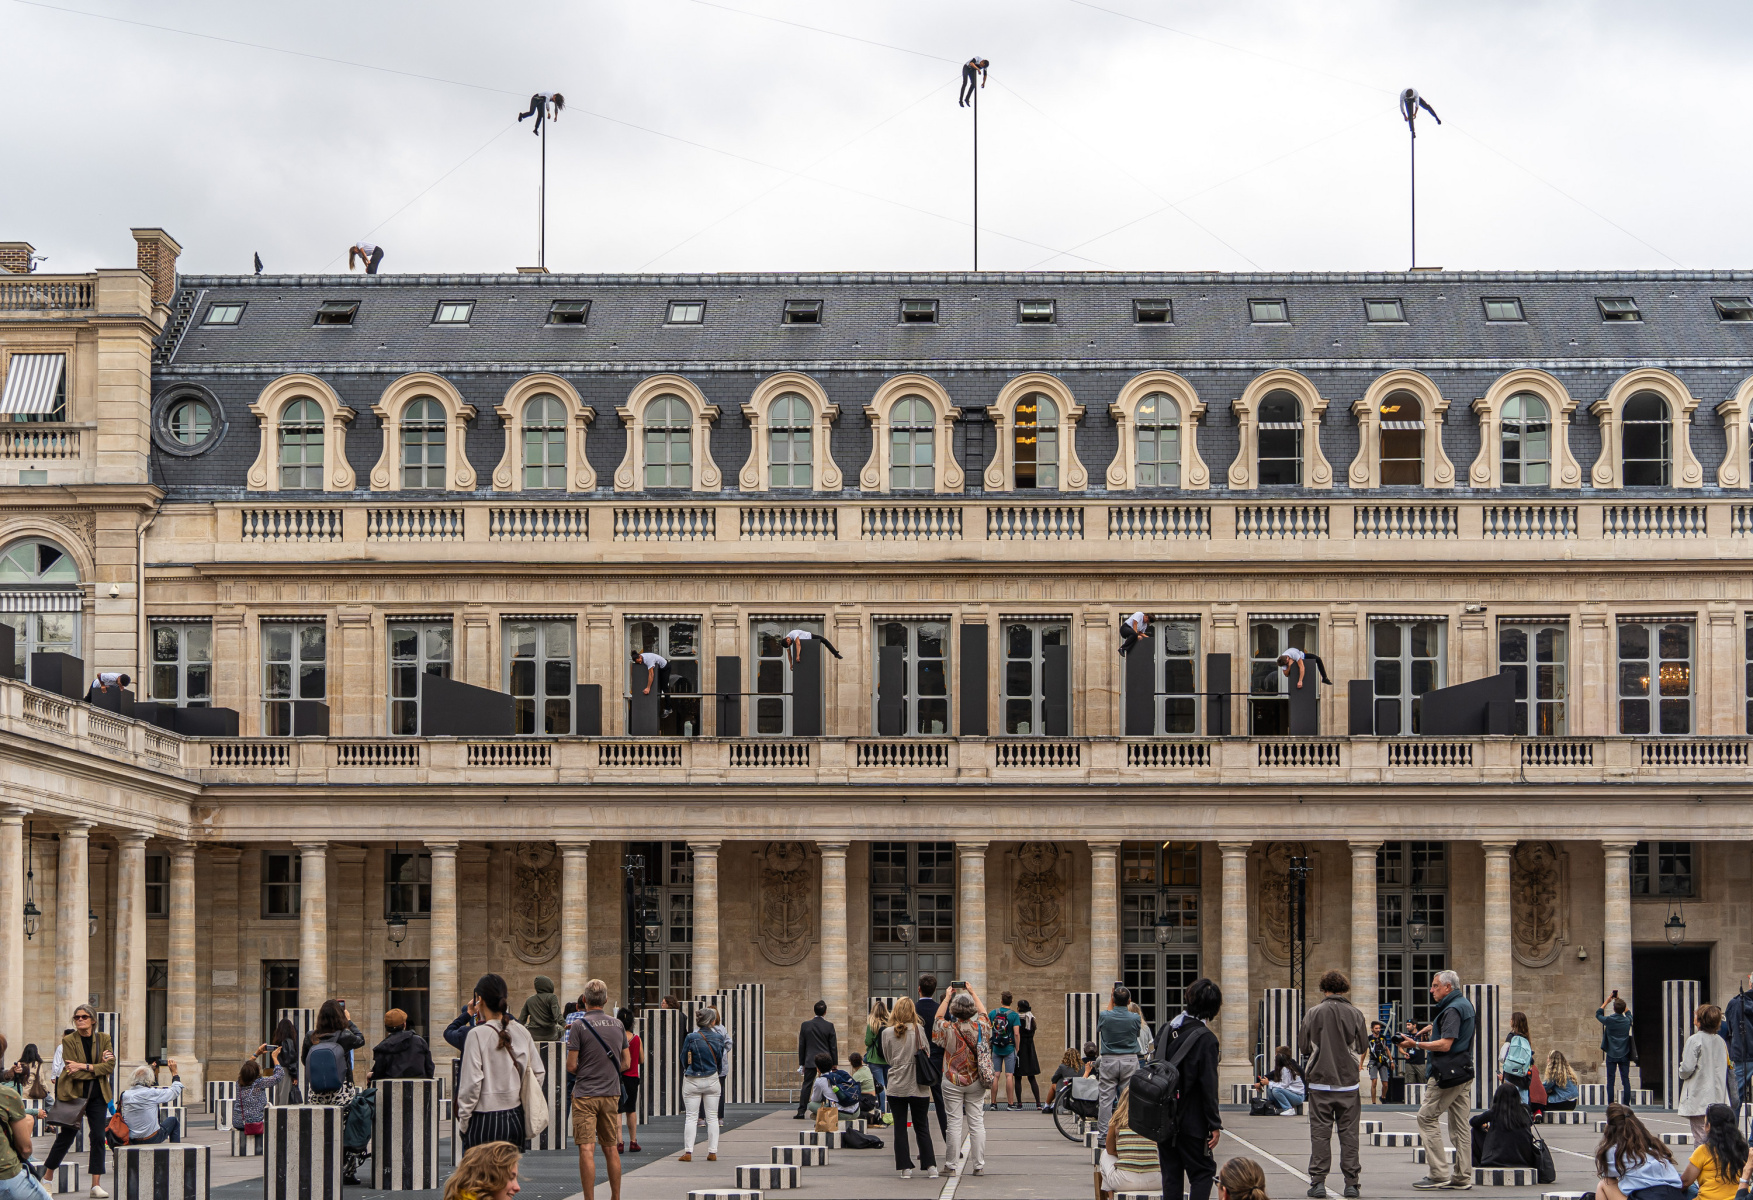 Horizon, an exceptional free acrobatic show on the Palais Royal